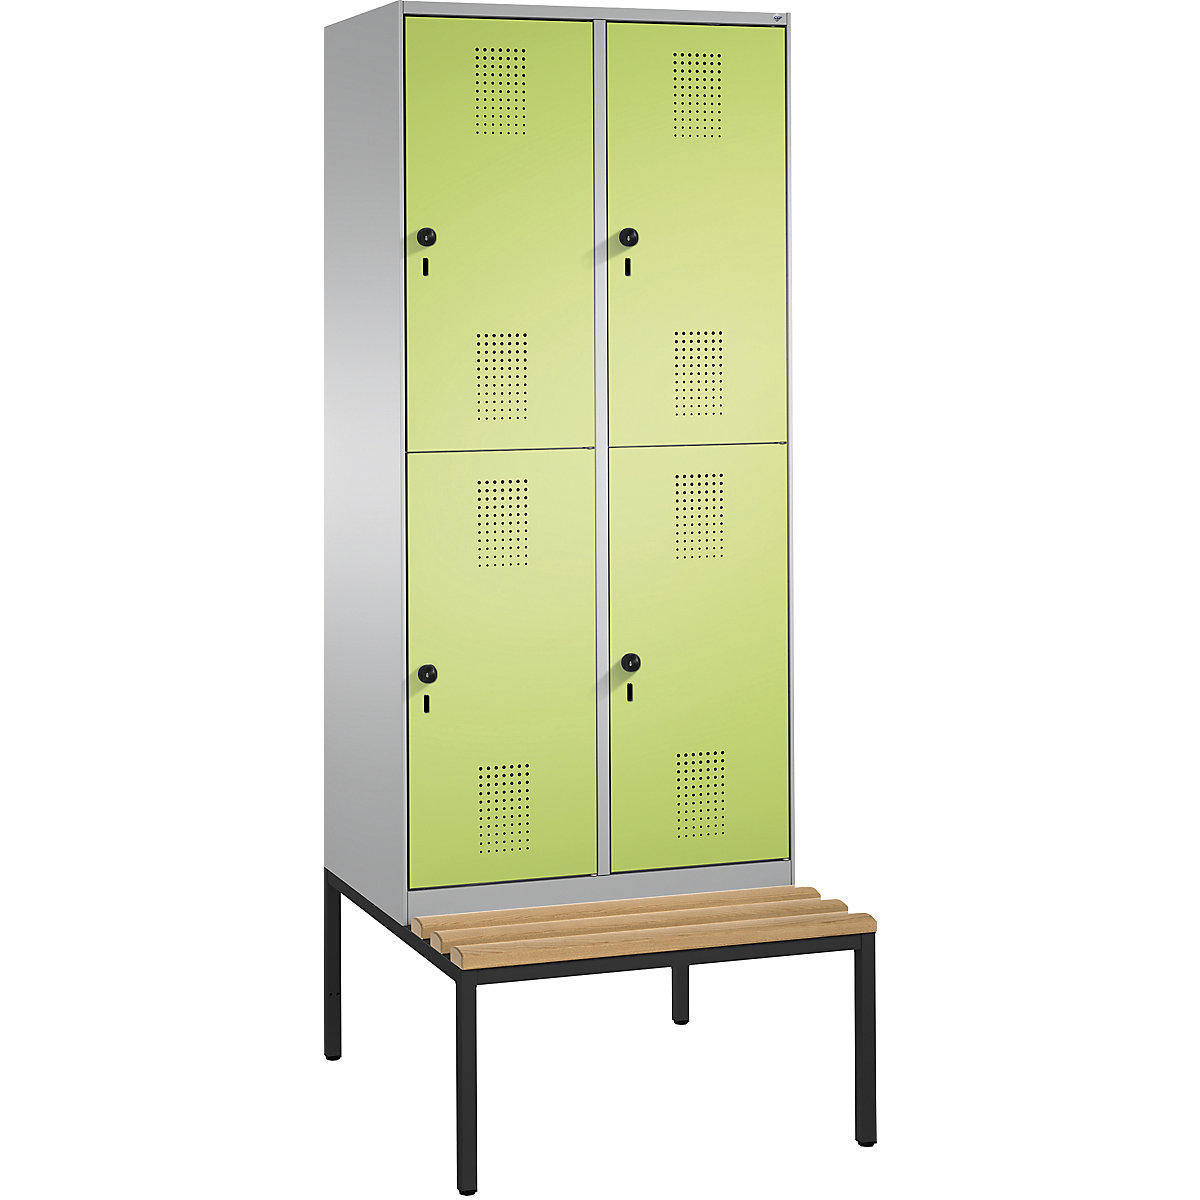 EVOLO cloakroom locker, double tier, with bench – C+P, 2 compartments, 2 shelf compartments each, compartment width 400 mm, white aluminium / viridian green-12